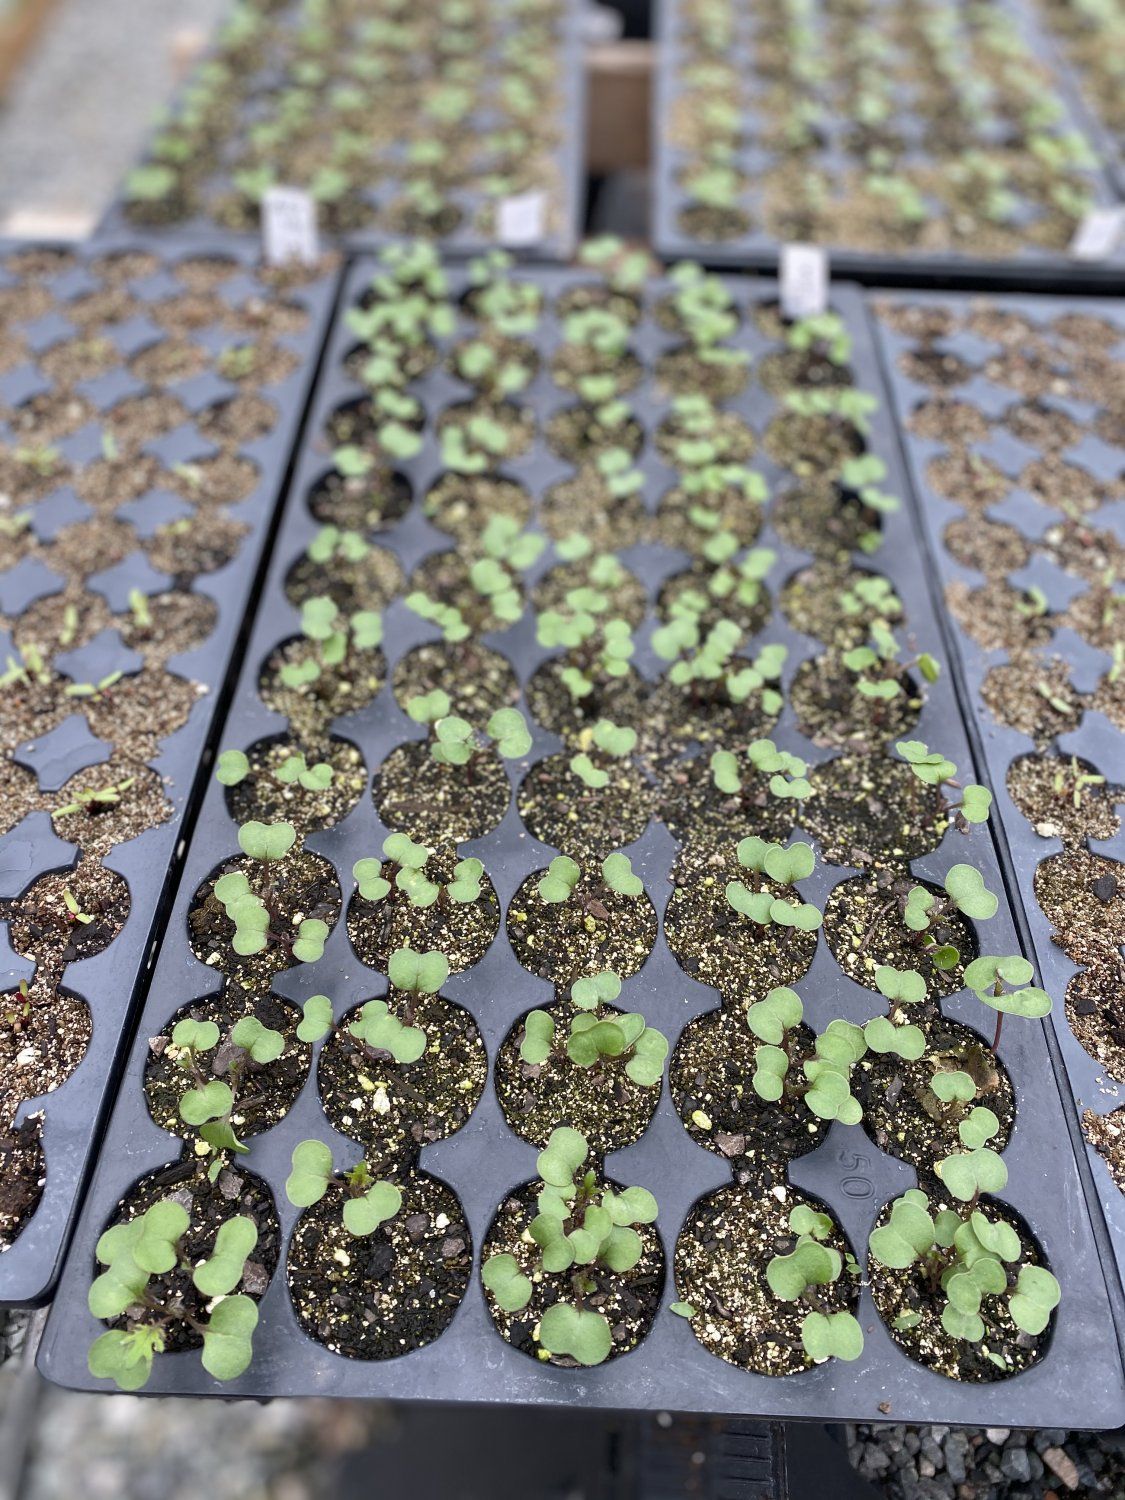 Previous Happening: Fall greenhouse is going!